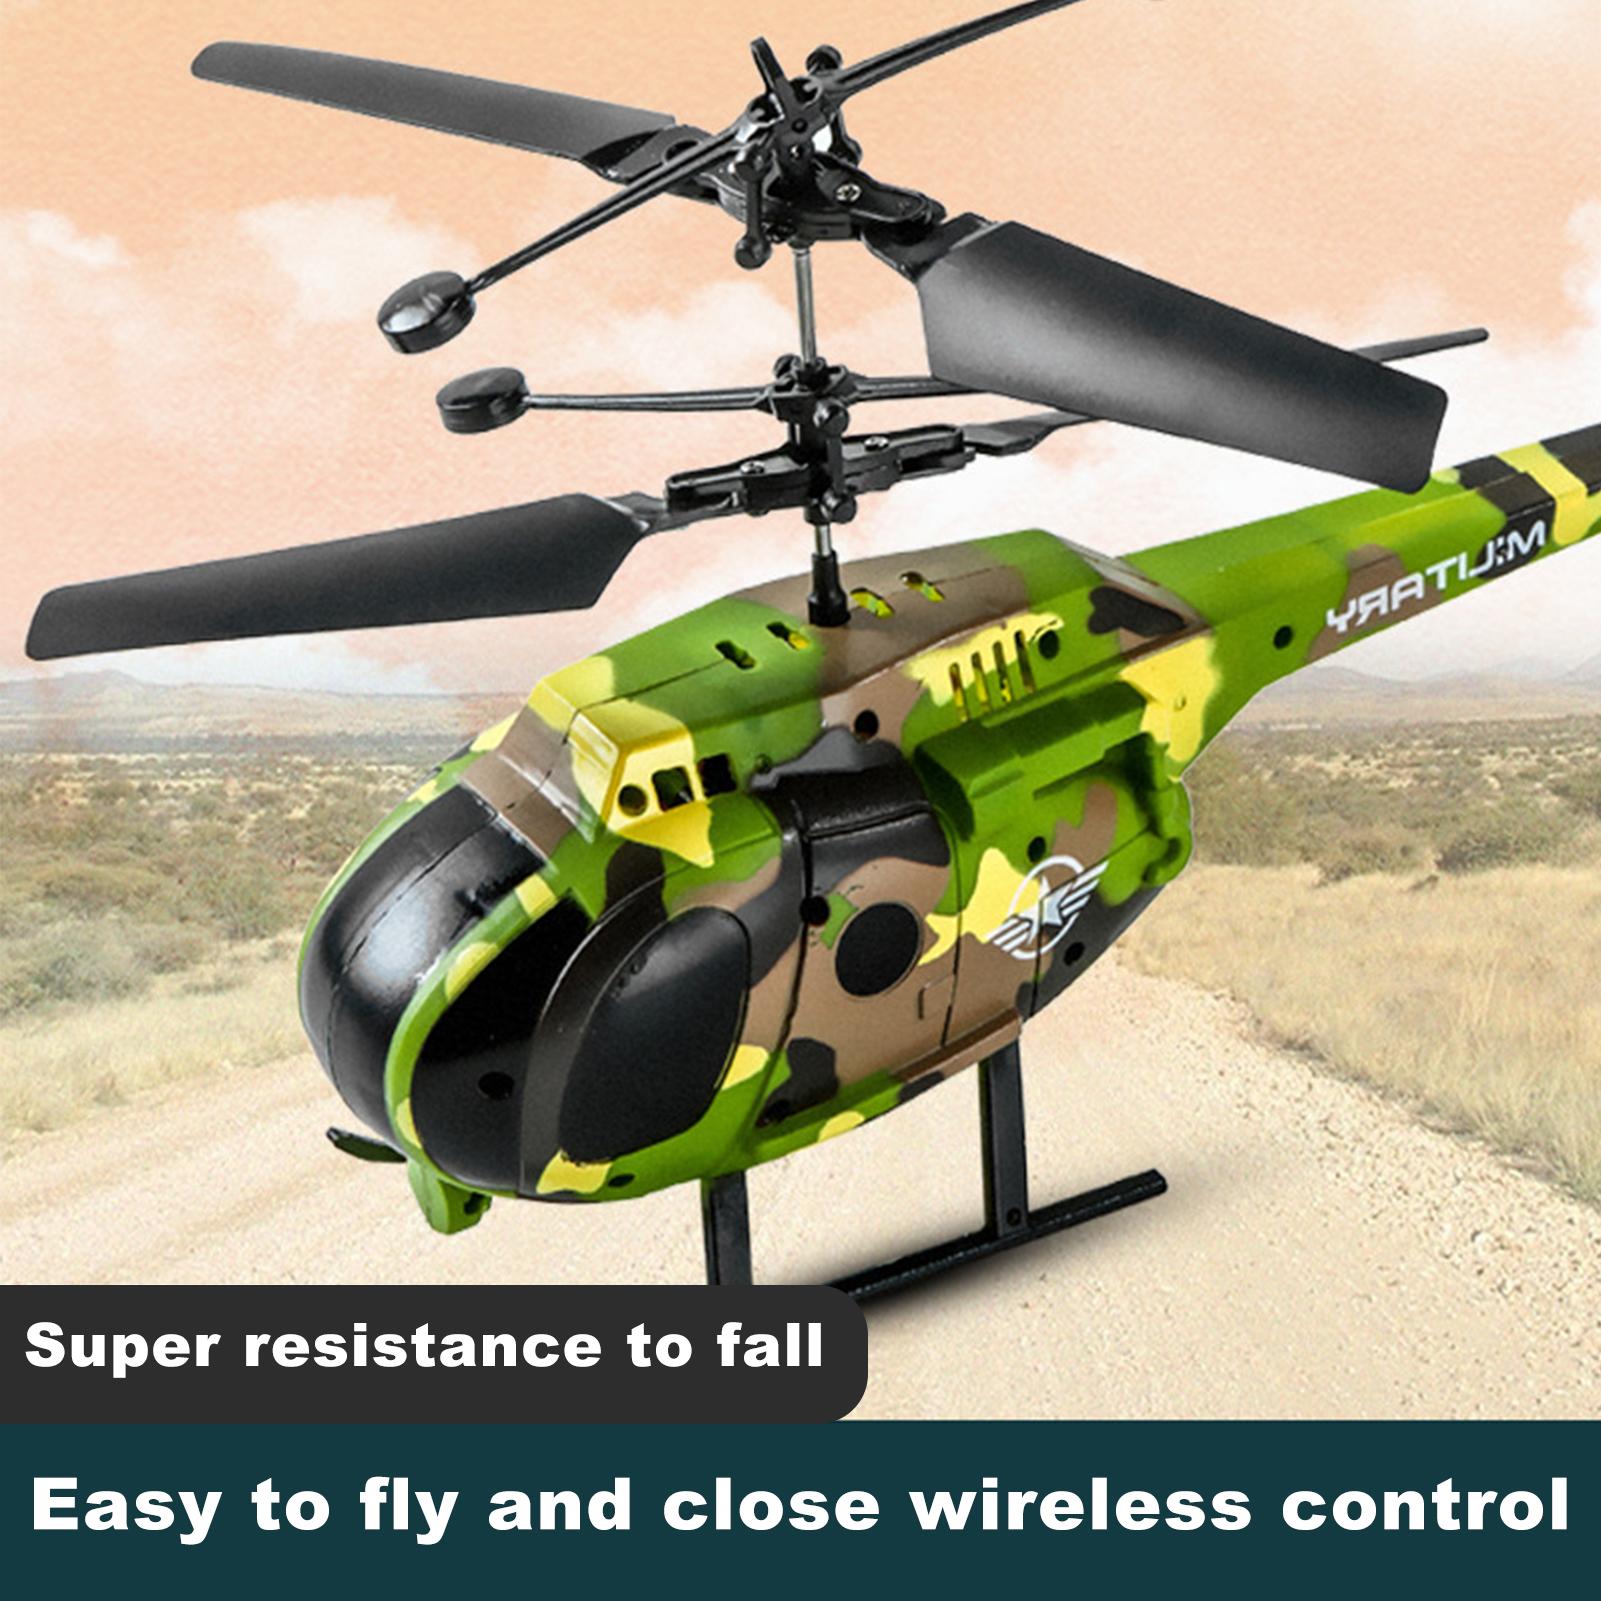 Rc Military Helicopter For Sale: How to Properly Maintain Your RC Military Helicopter 